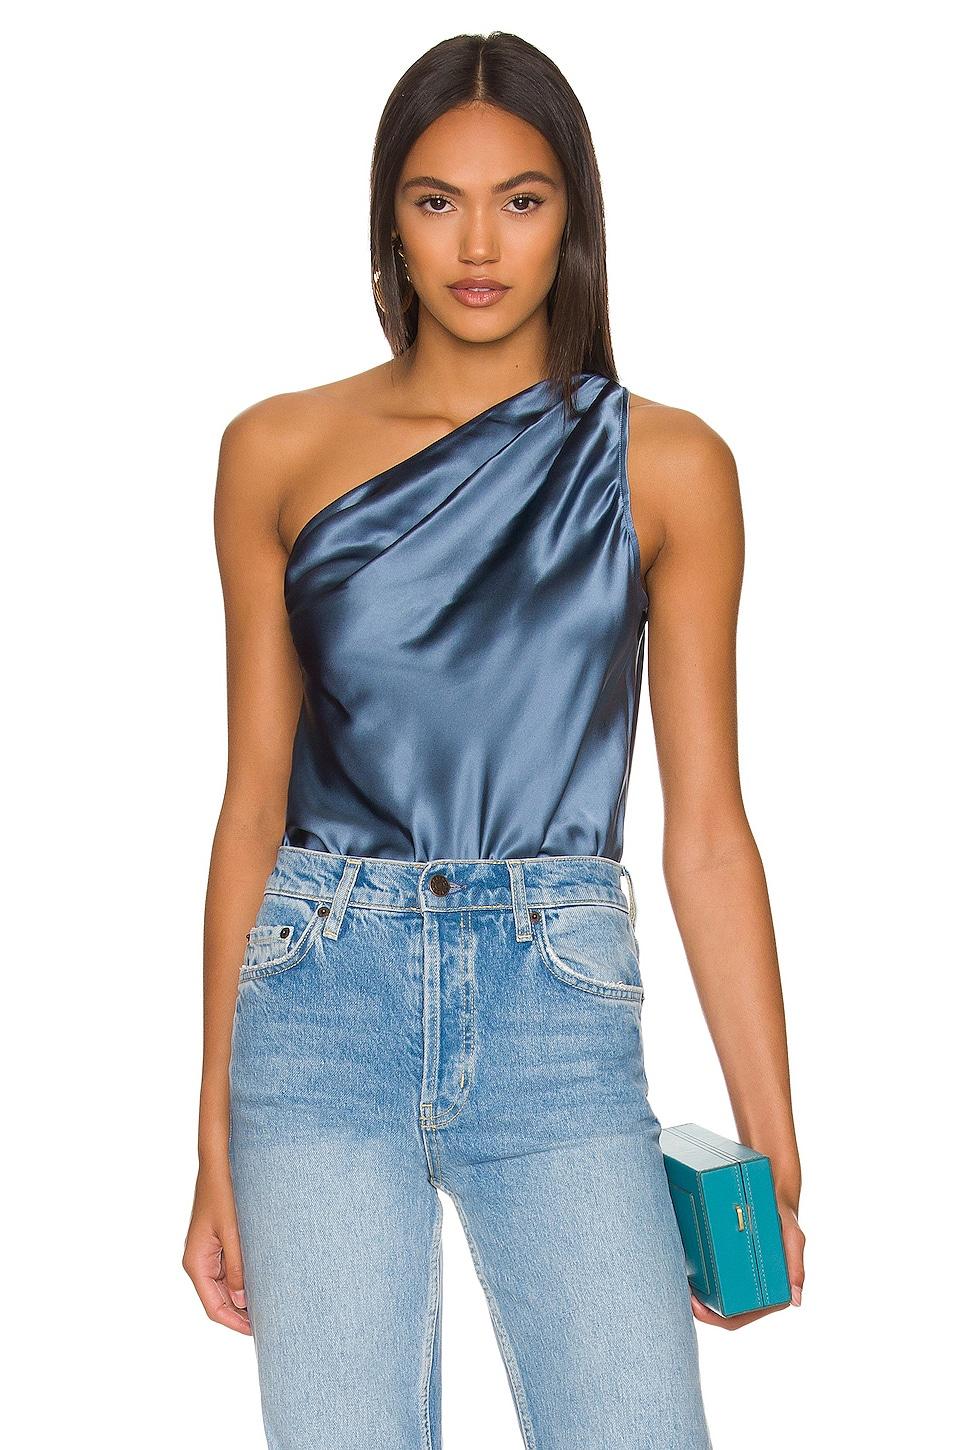 Cami NYC Darby Bodysuit in Blue